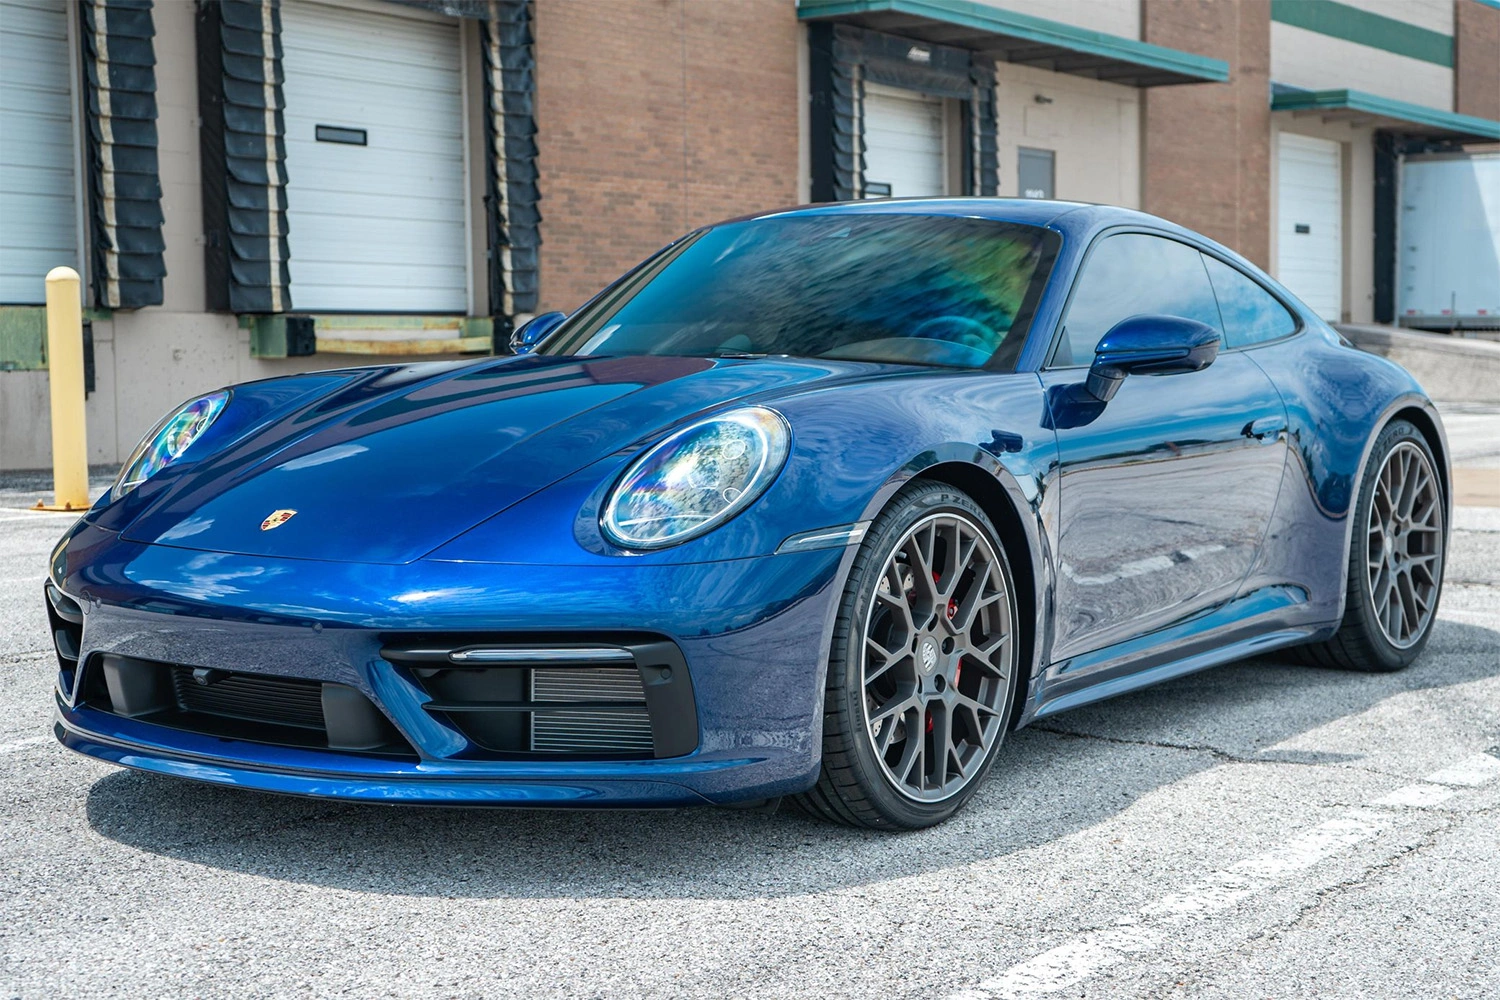 911 Porsche Used Reviews: The Perfect Blend of Luxury and Performance